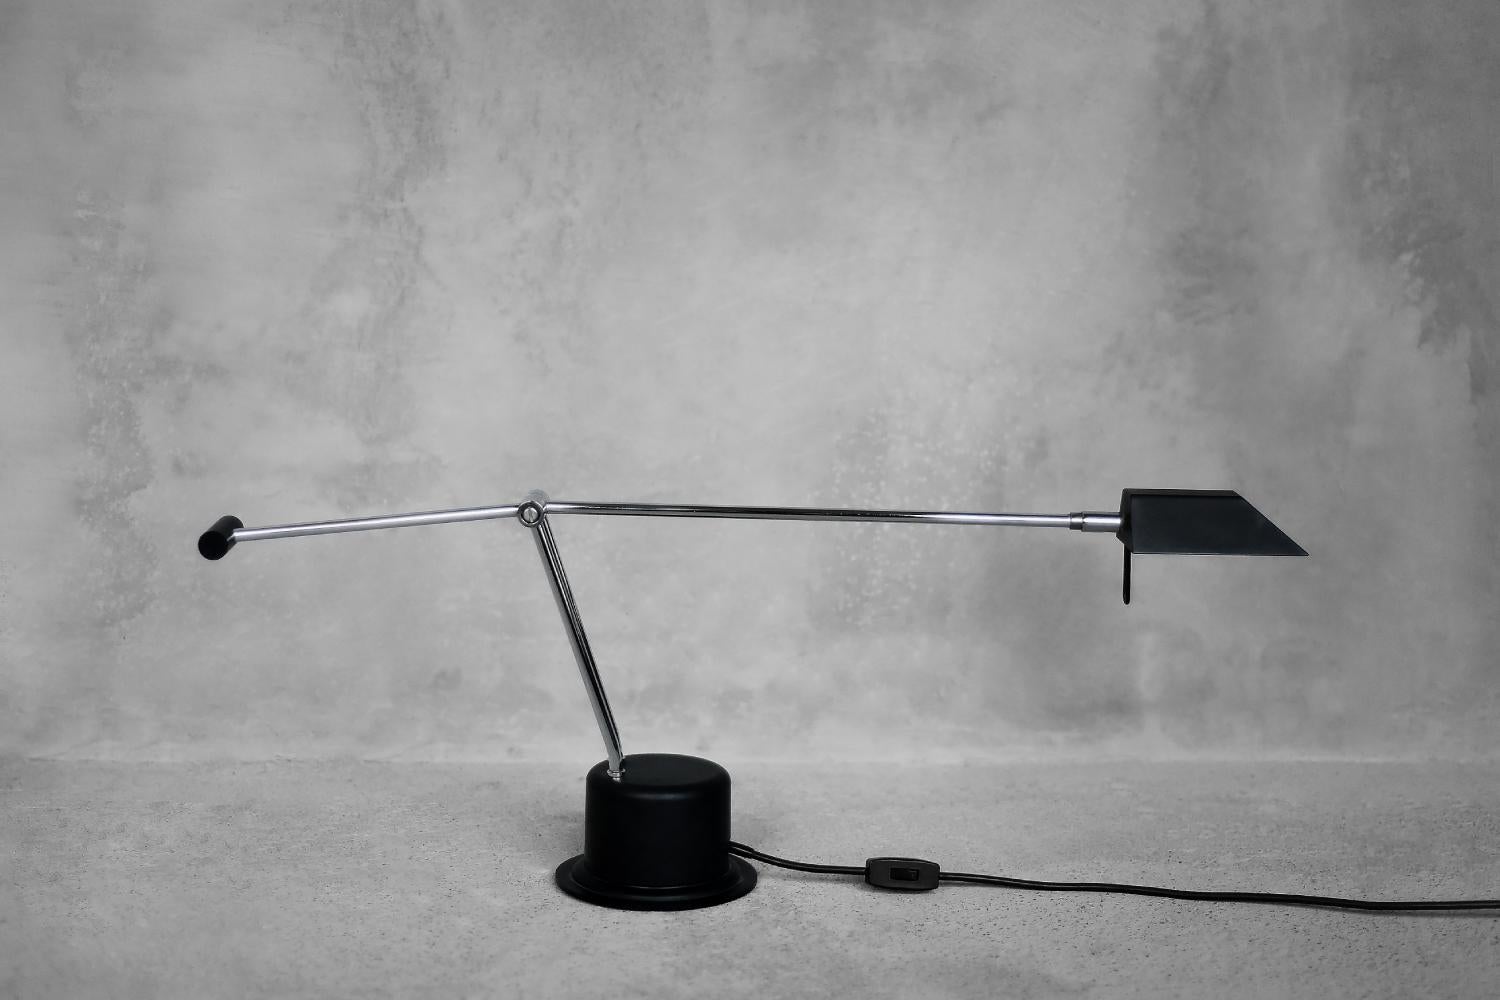 This minimalist desk lamp was produced by the Belgian manufacturer Massive during the 1980s. The movable arm is made of chrome-plated steel, and the base and lampshade are made of high-quality black plastic. The arm and shade can be adjusted to